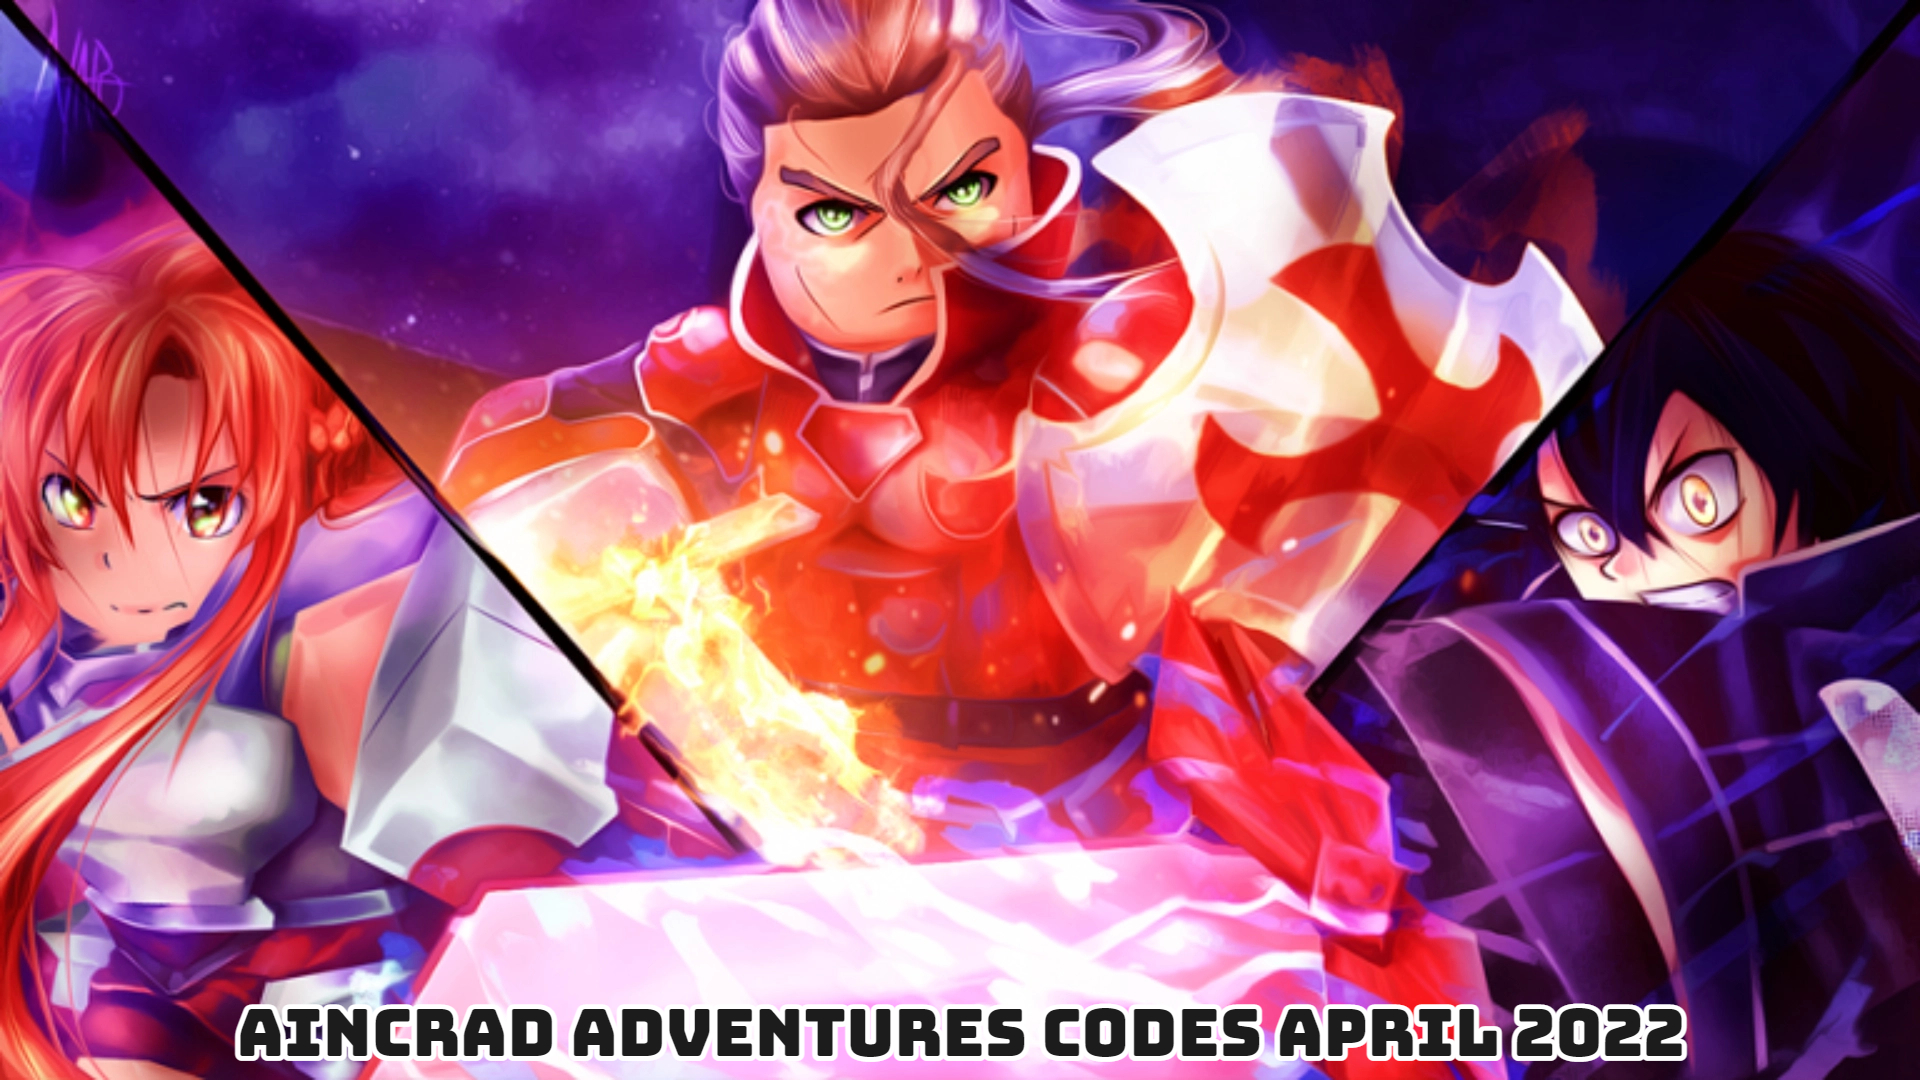 You are currently viewing Aincrad Adventures Codes Today 13 April 2022